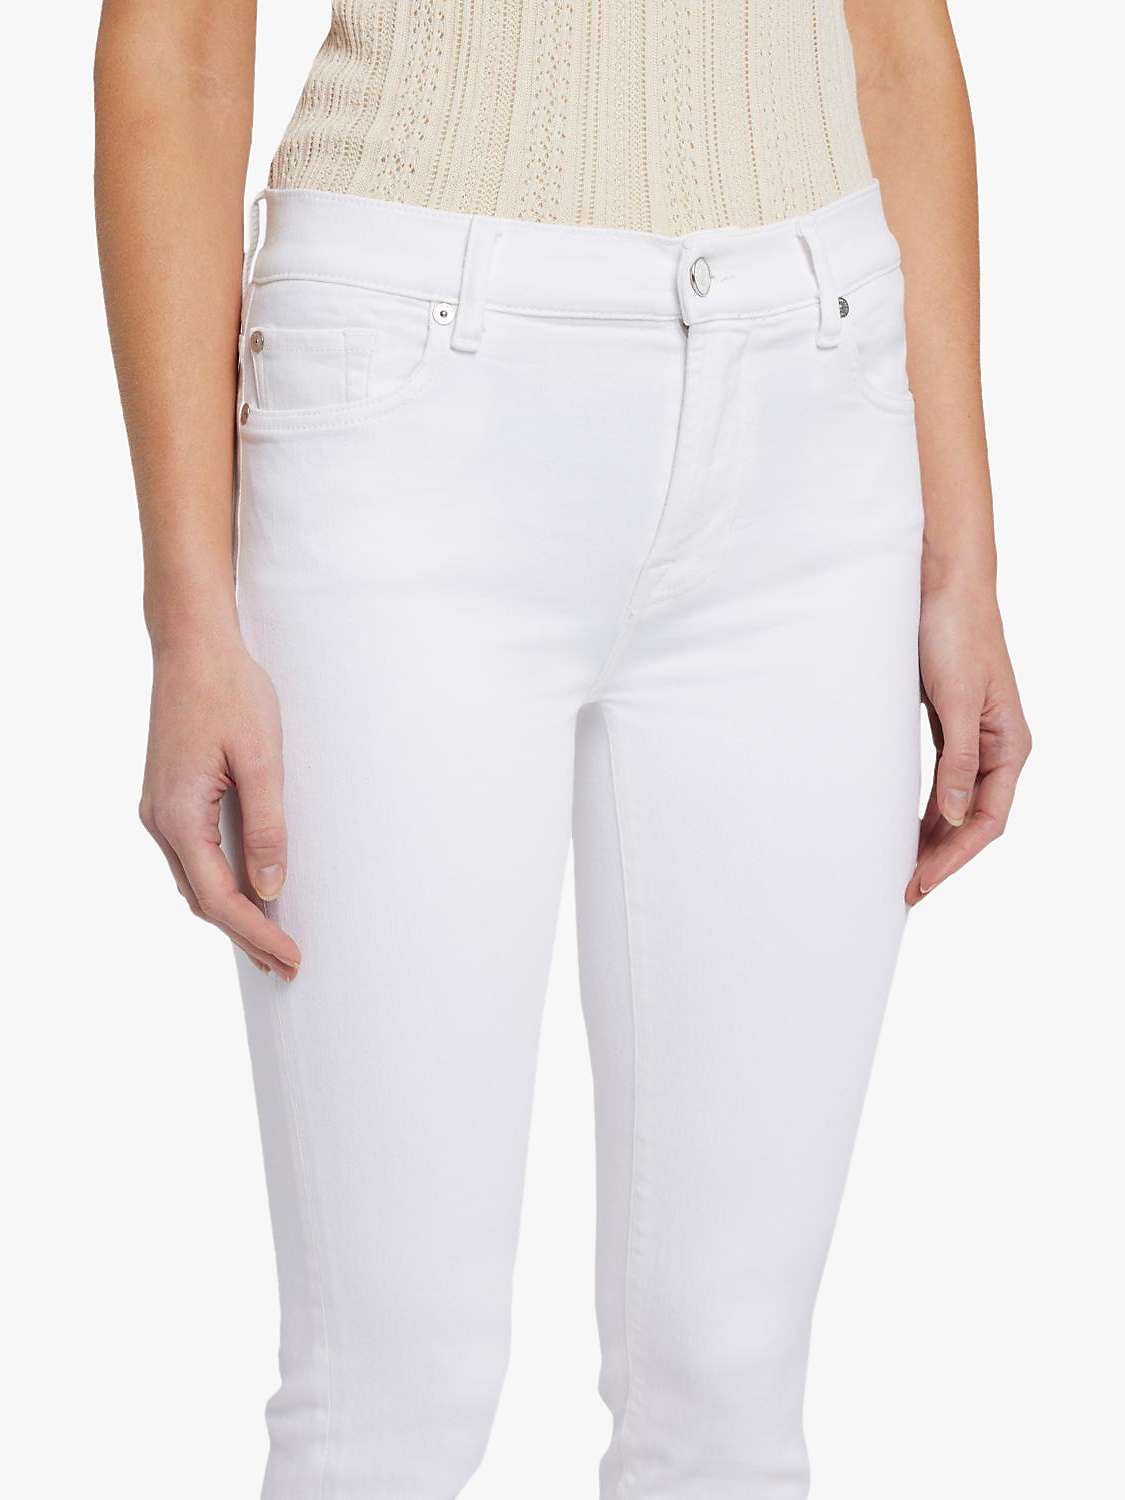 Buy 7 For All Mankind Roxanne Slim Fit Ankle Jeans, White Online at johnlewis.com